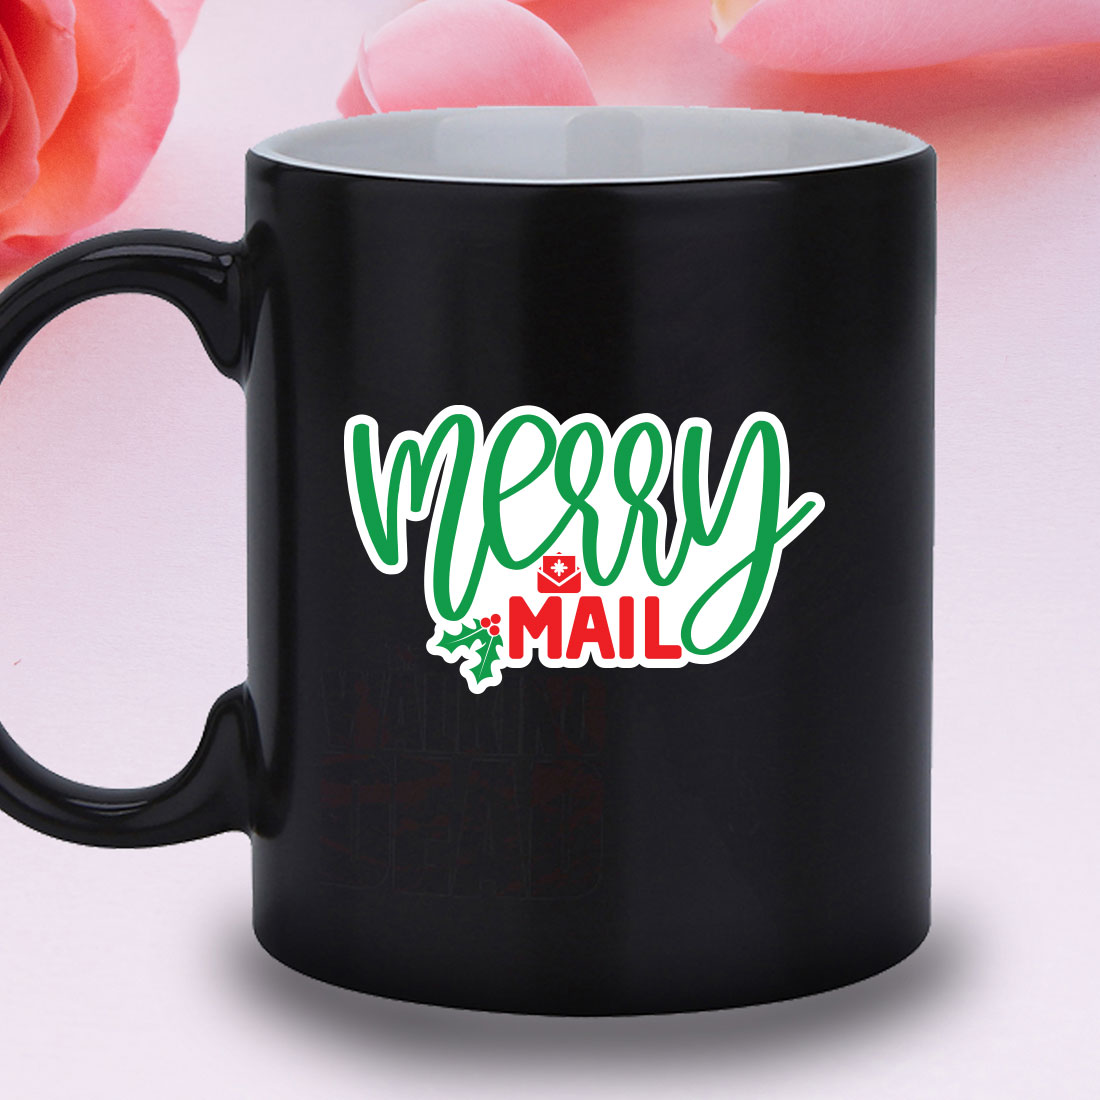 Black coffee mug with merry and mail on it.